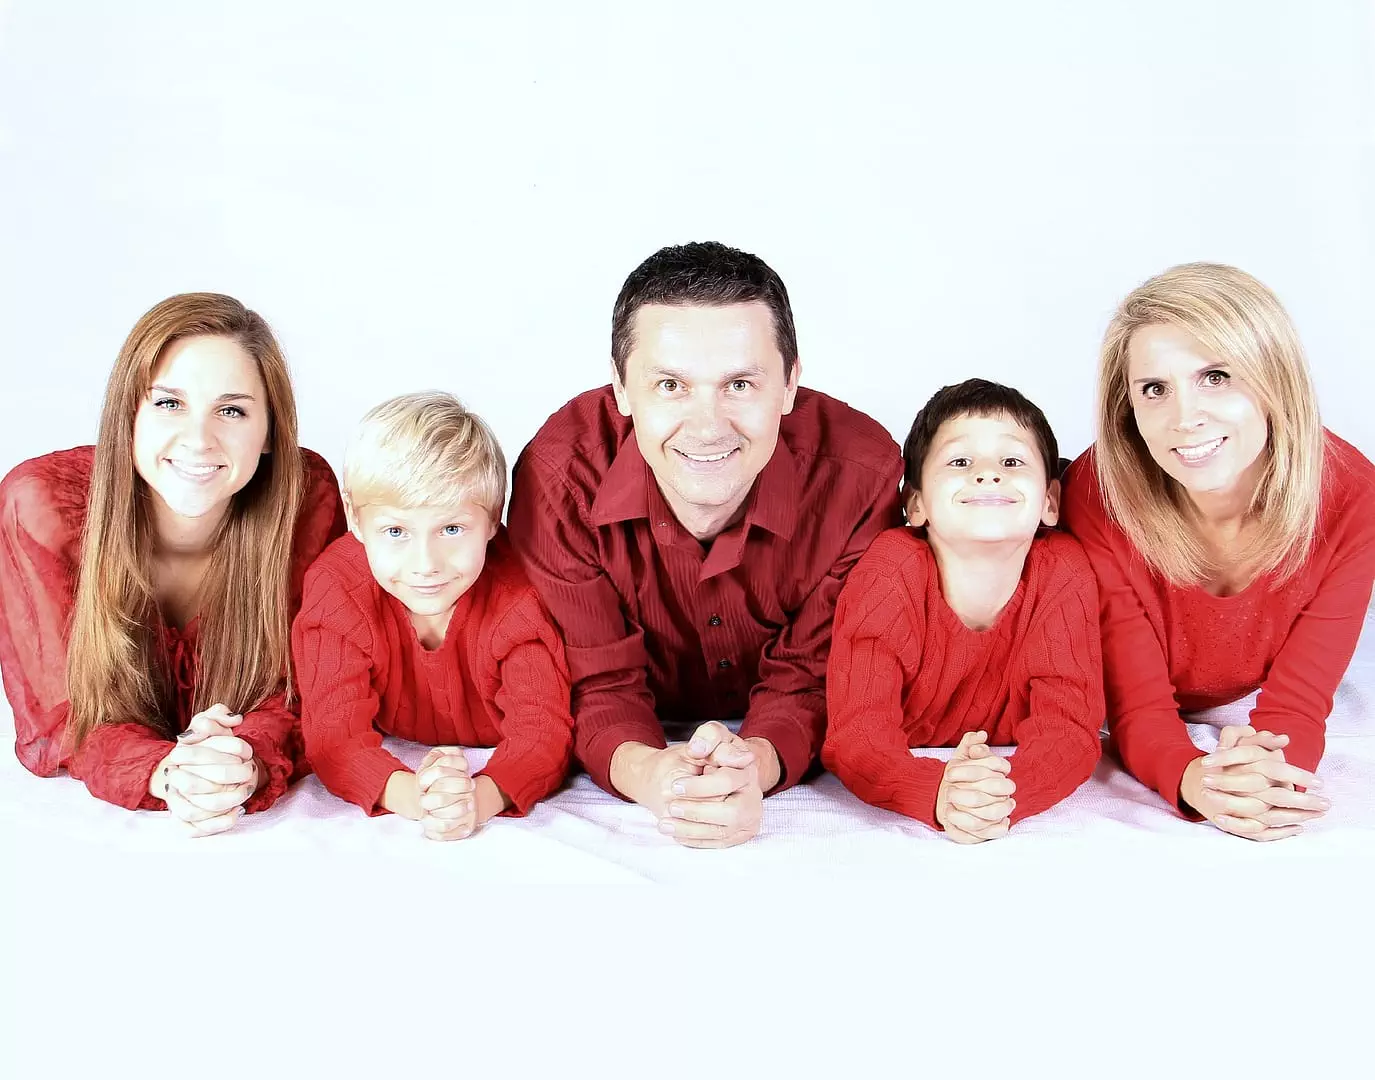 Familie in roter Kleidung